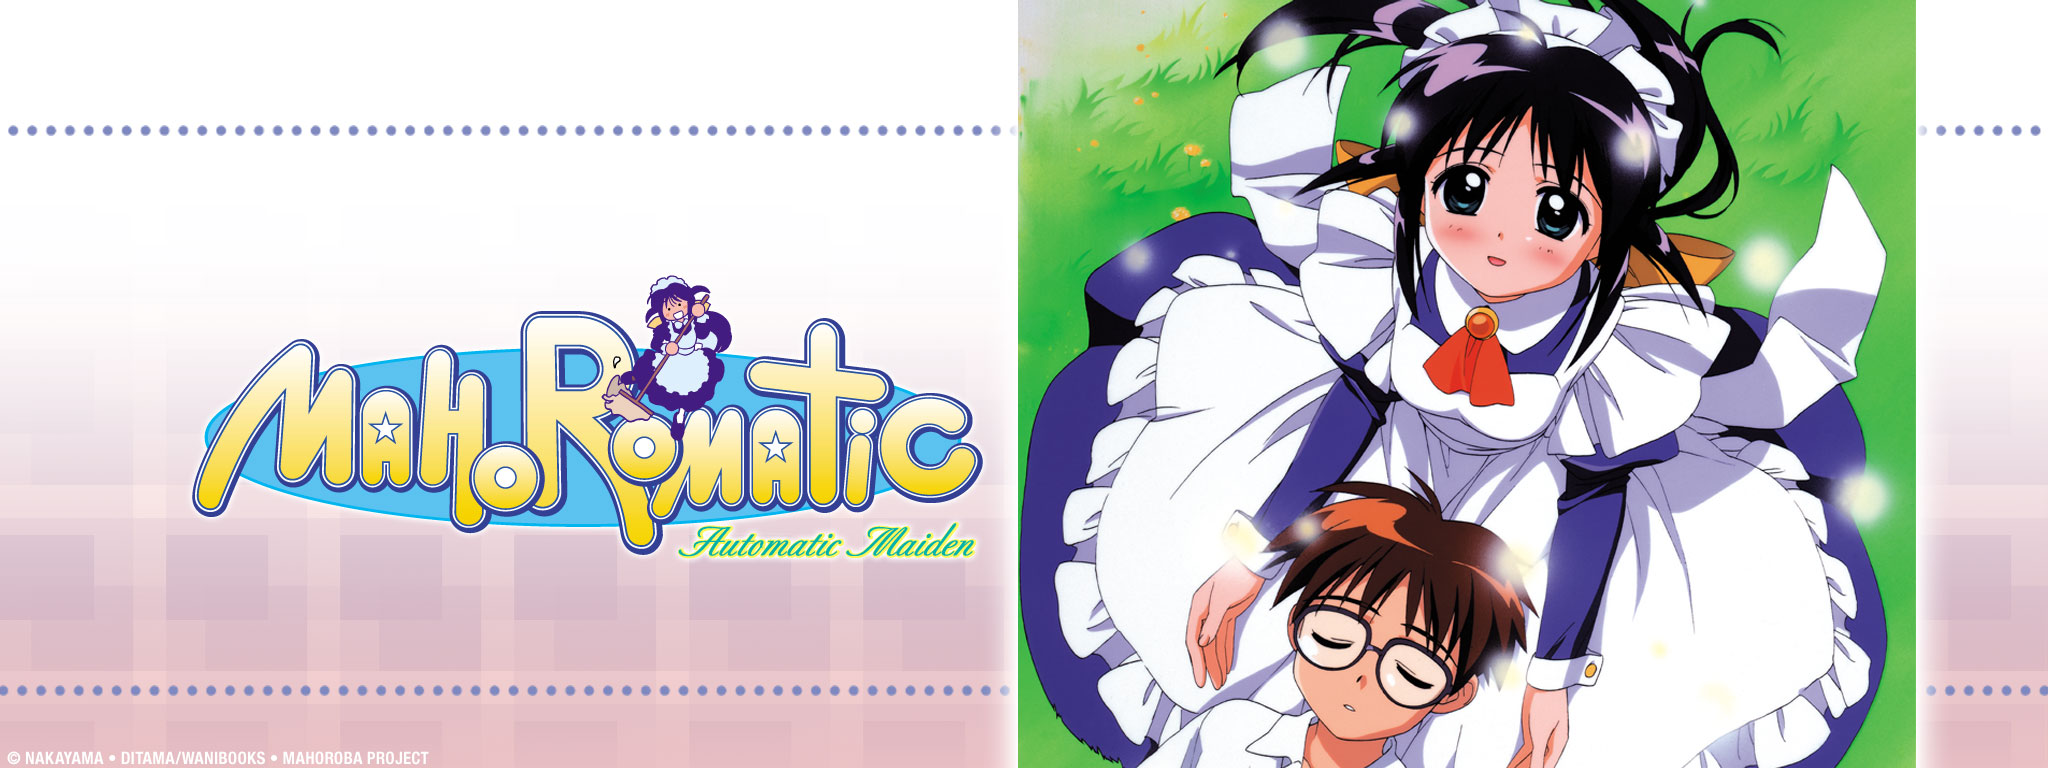 Title Art for Mahoromatic: Automatic Maiden